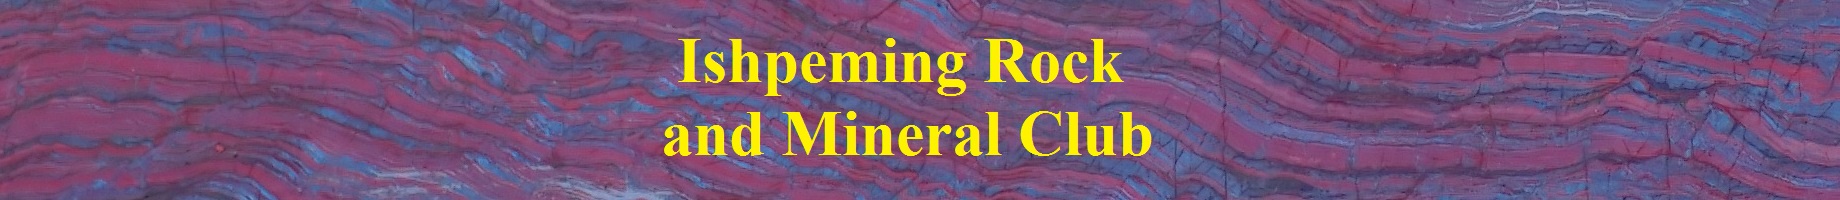 Ishpeming Rock and Mineral Club